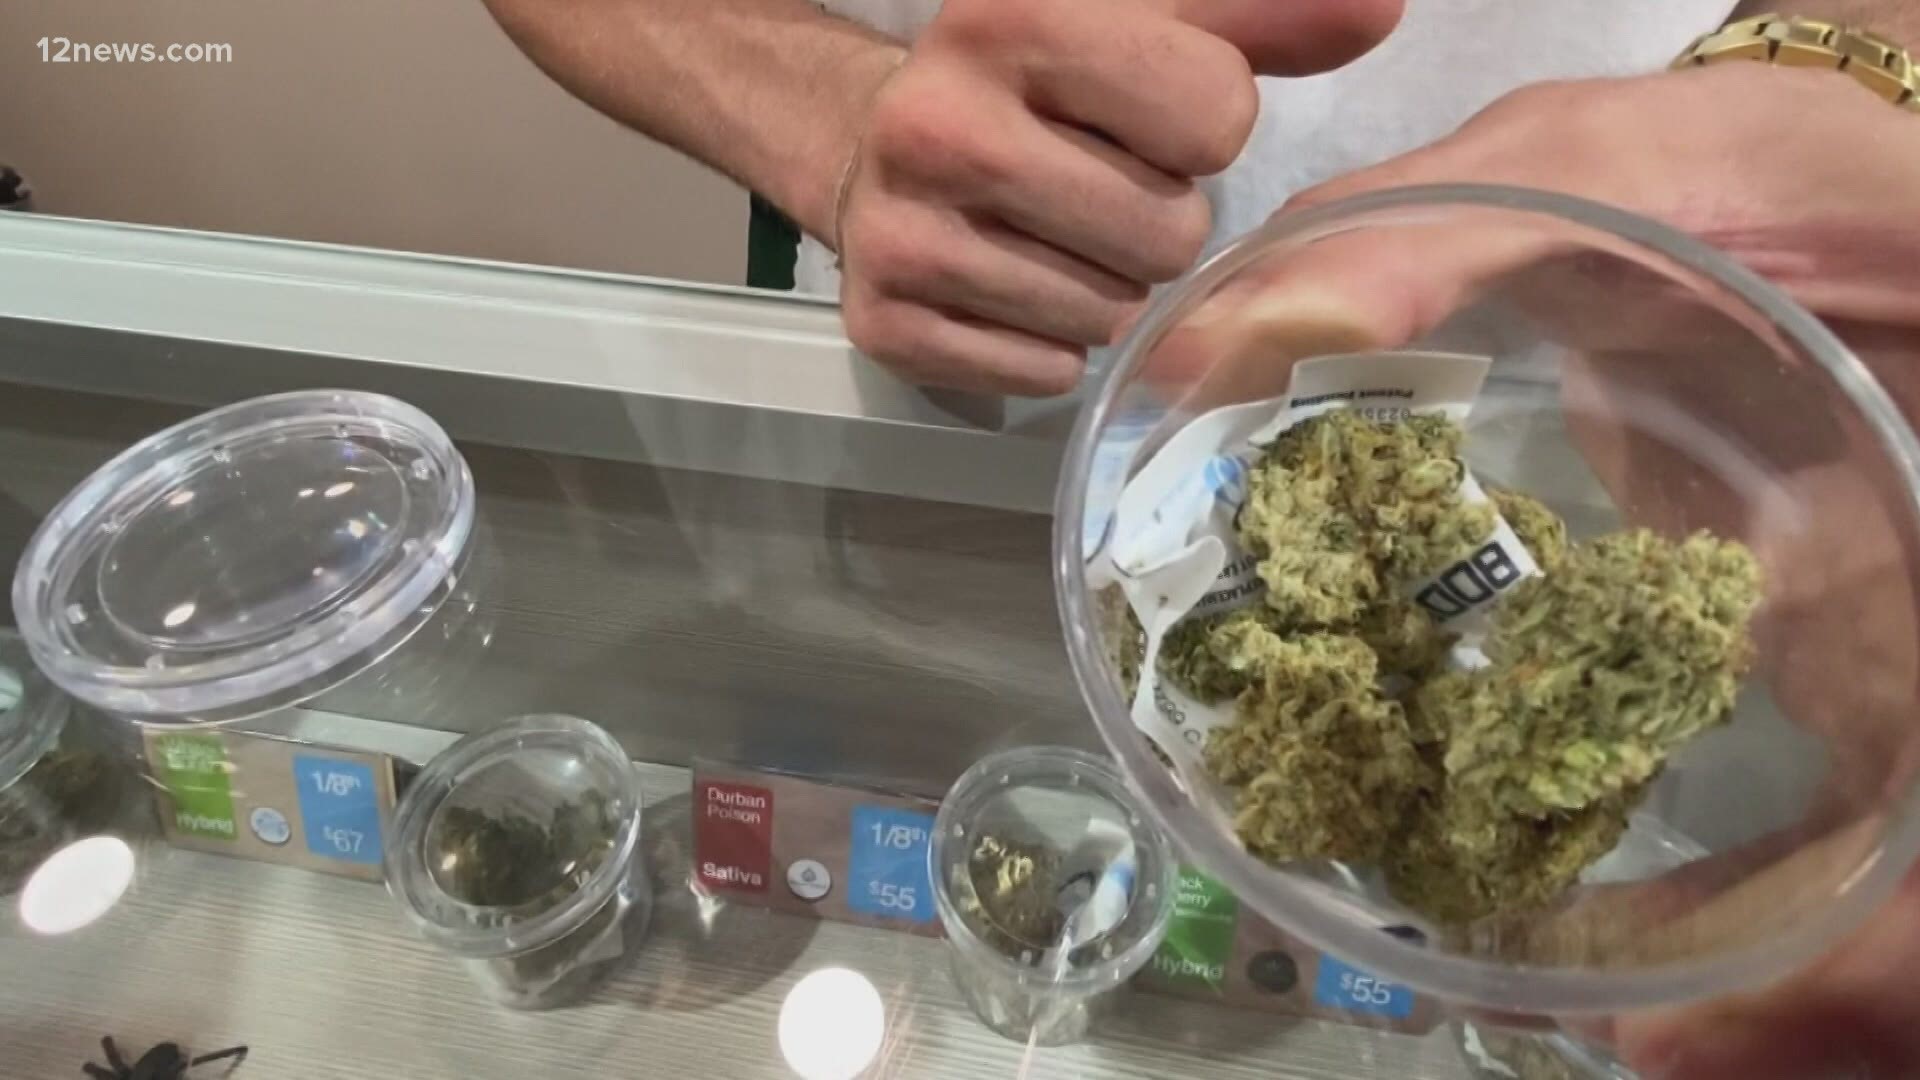 Local dispensaries can now apply for their recreational licenses, however, it comes with a hefty price tag.